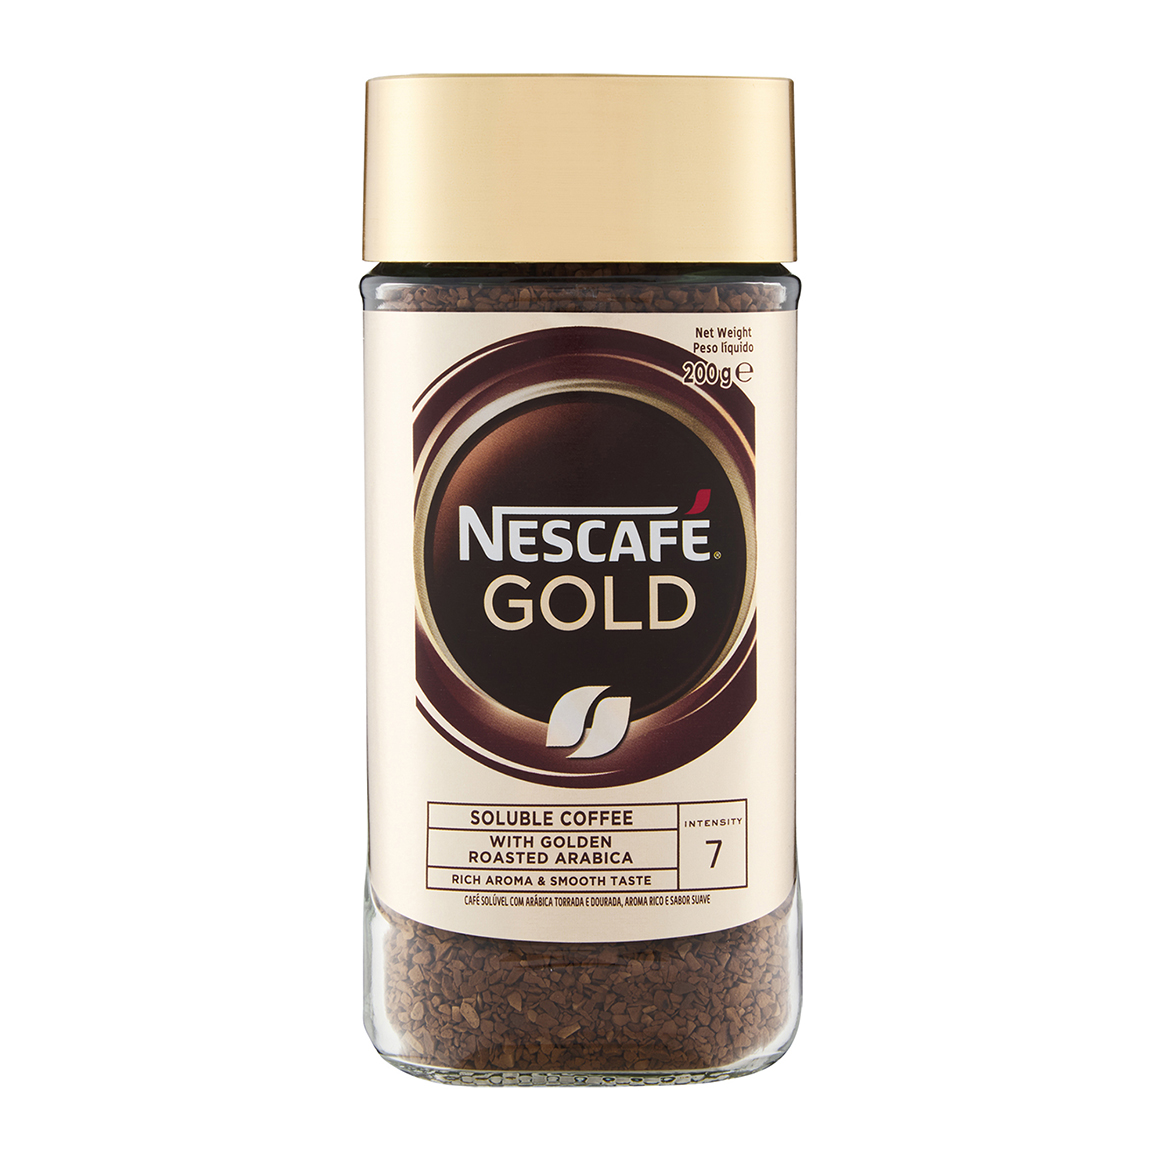 Nescafe Launches Ice Roast – Soluble Coffee